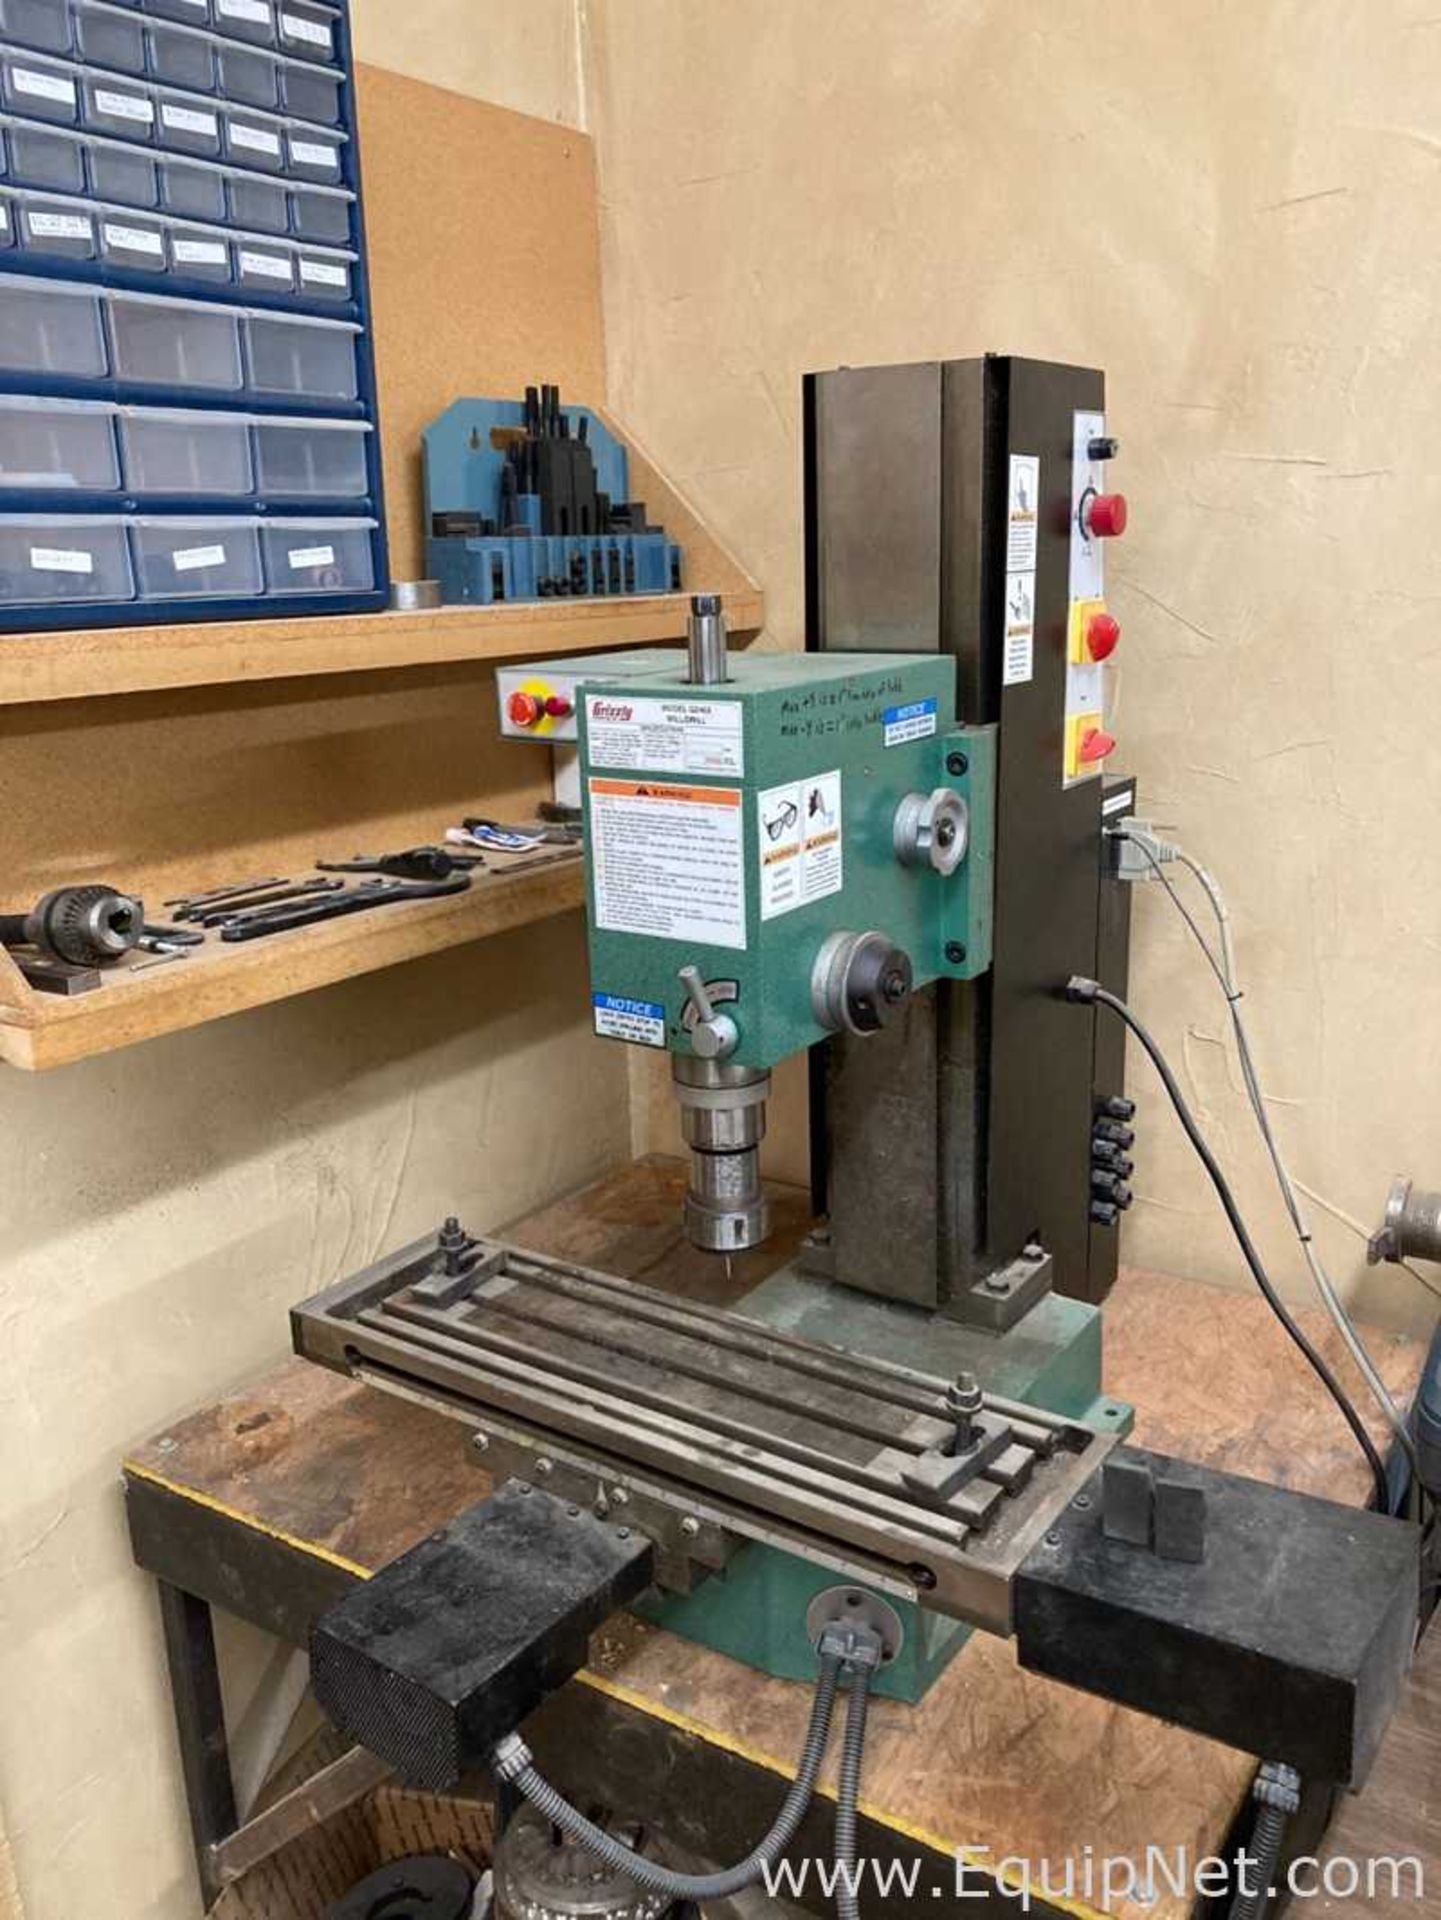 EQUIPNET LISTING #842878; REMOVAL COST: TBD; DESCRIPTION: KDN Tool and Automation X3 CNC Milling